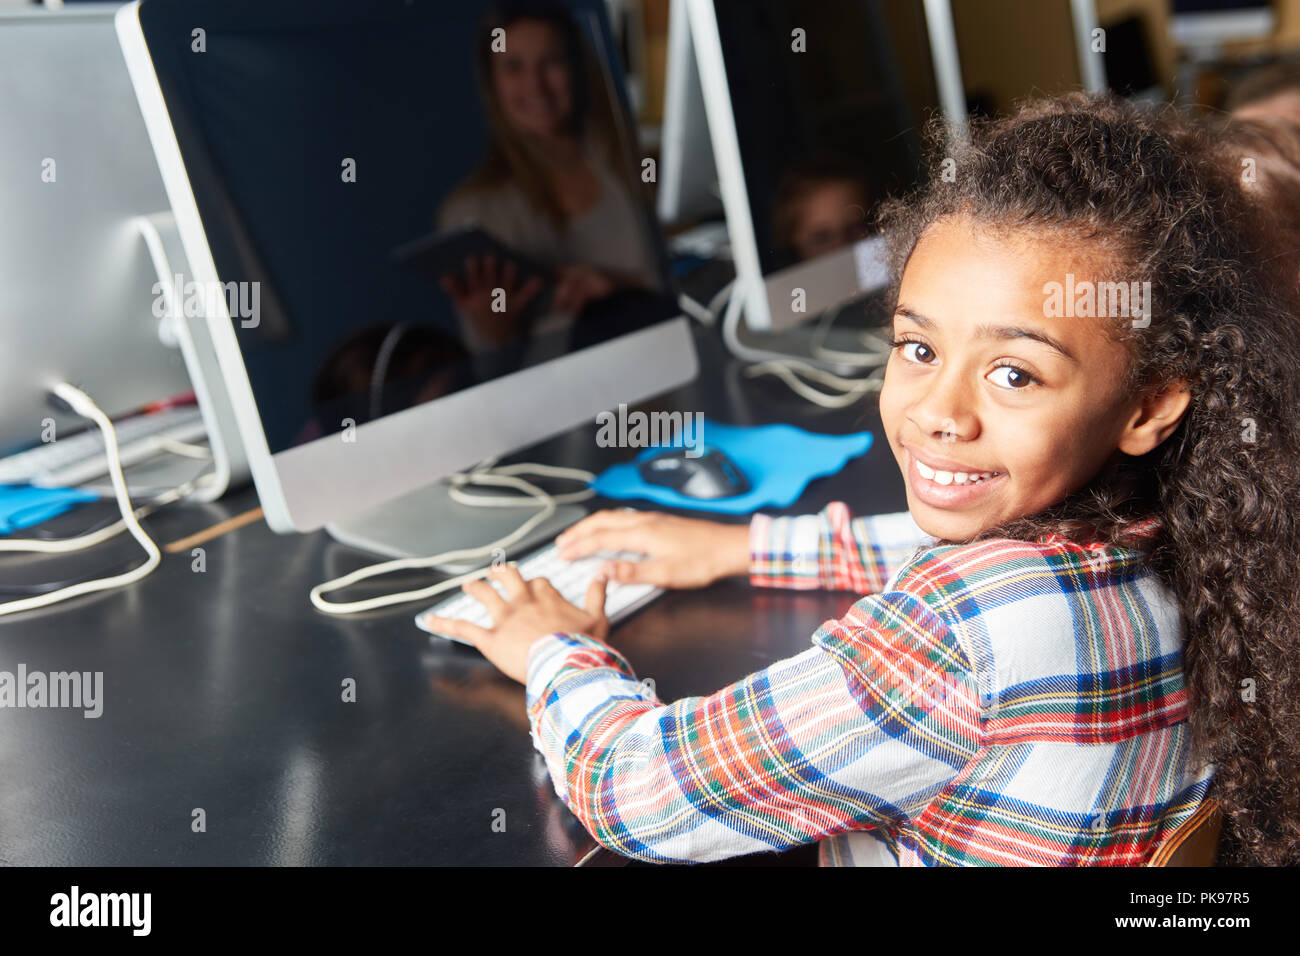 Girl enjoys elementary school computer science course at computer Stock Photo